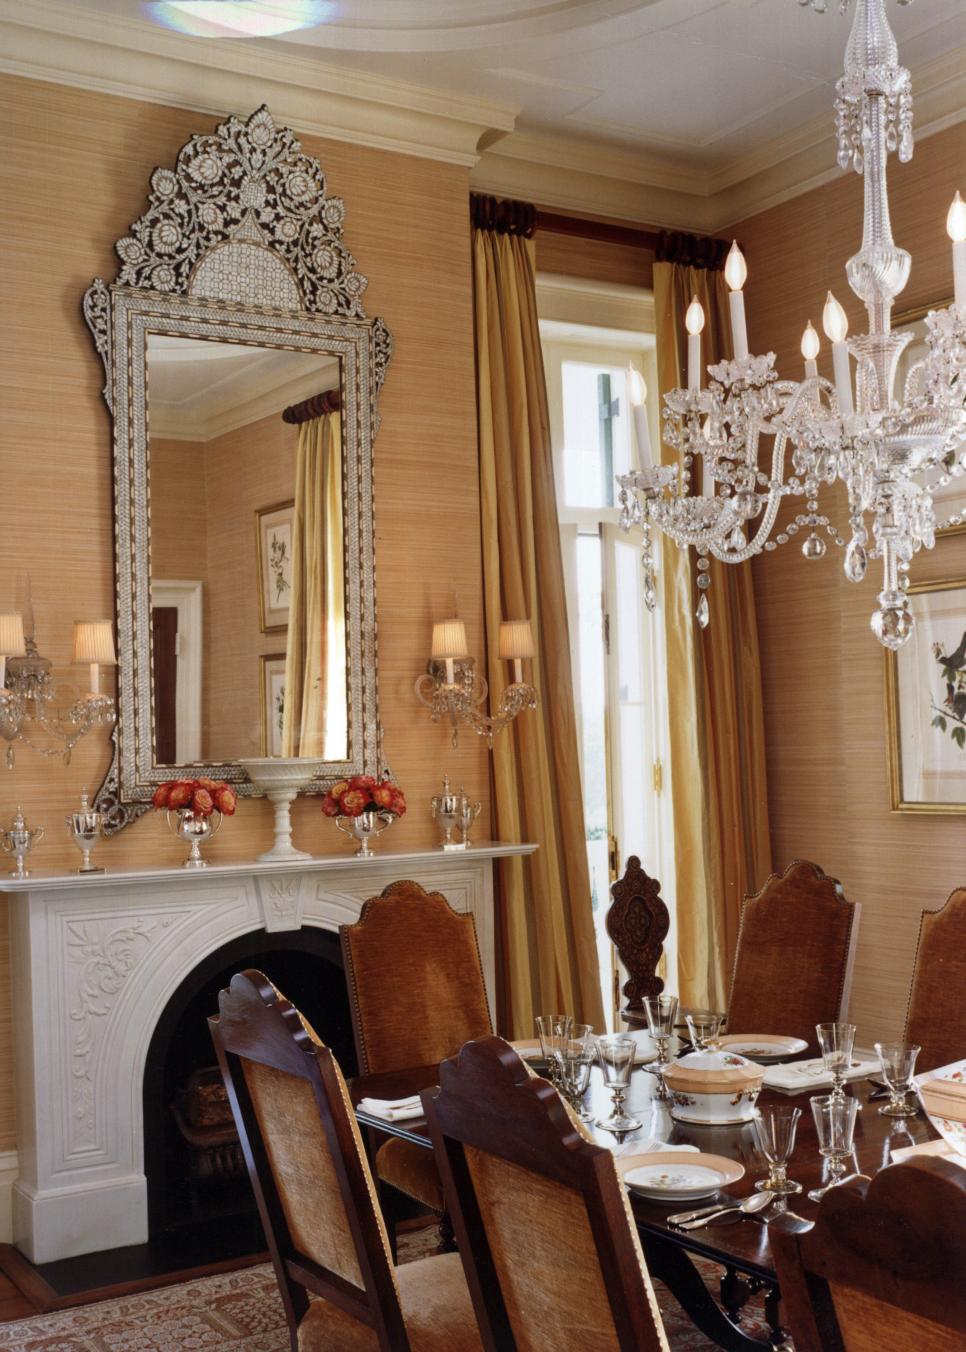 Traditional Dinning Room With Ornate Chandelier and Mirror